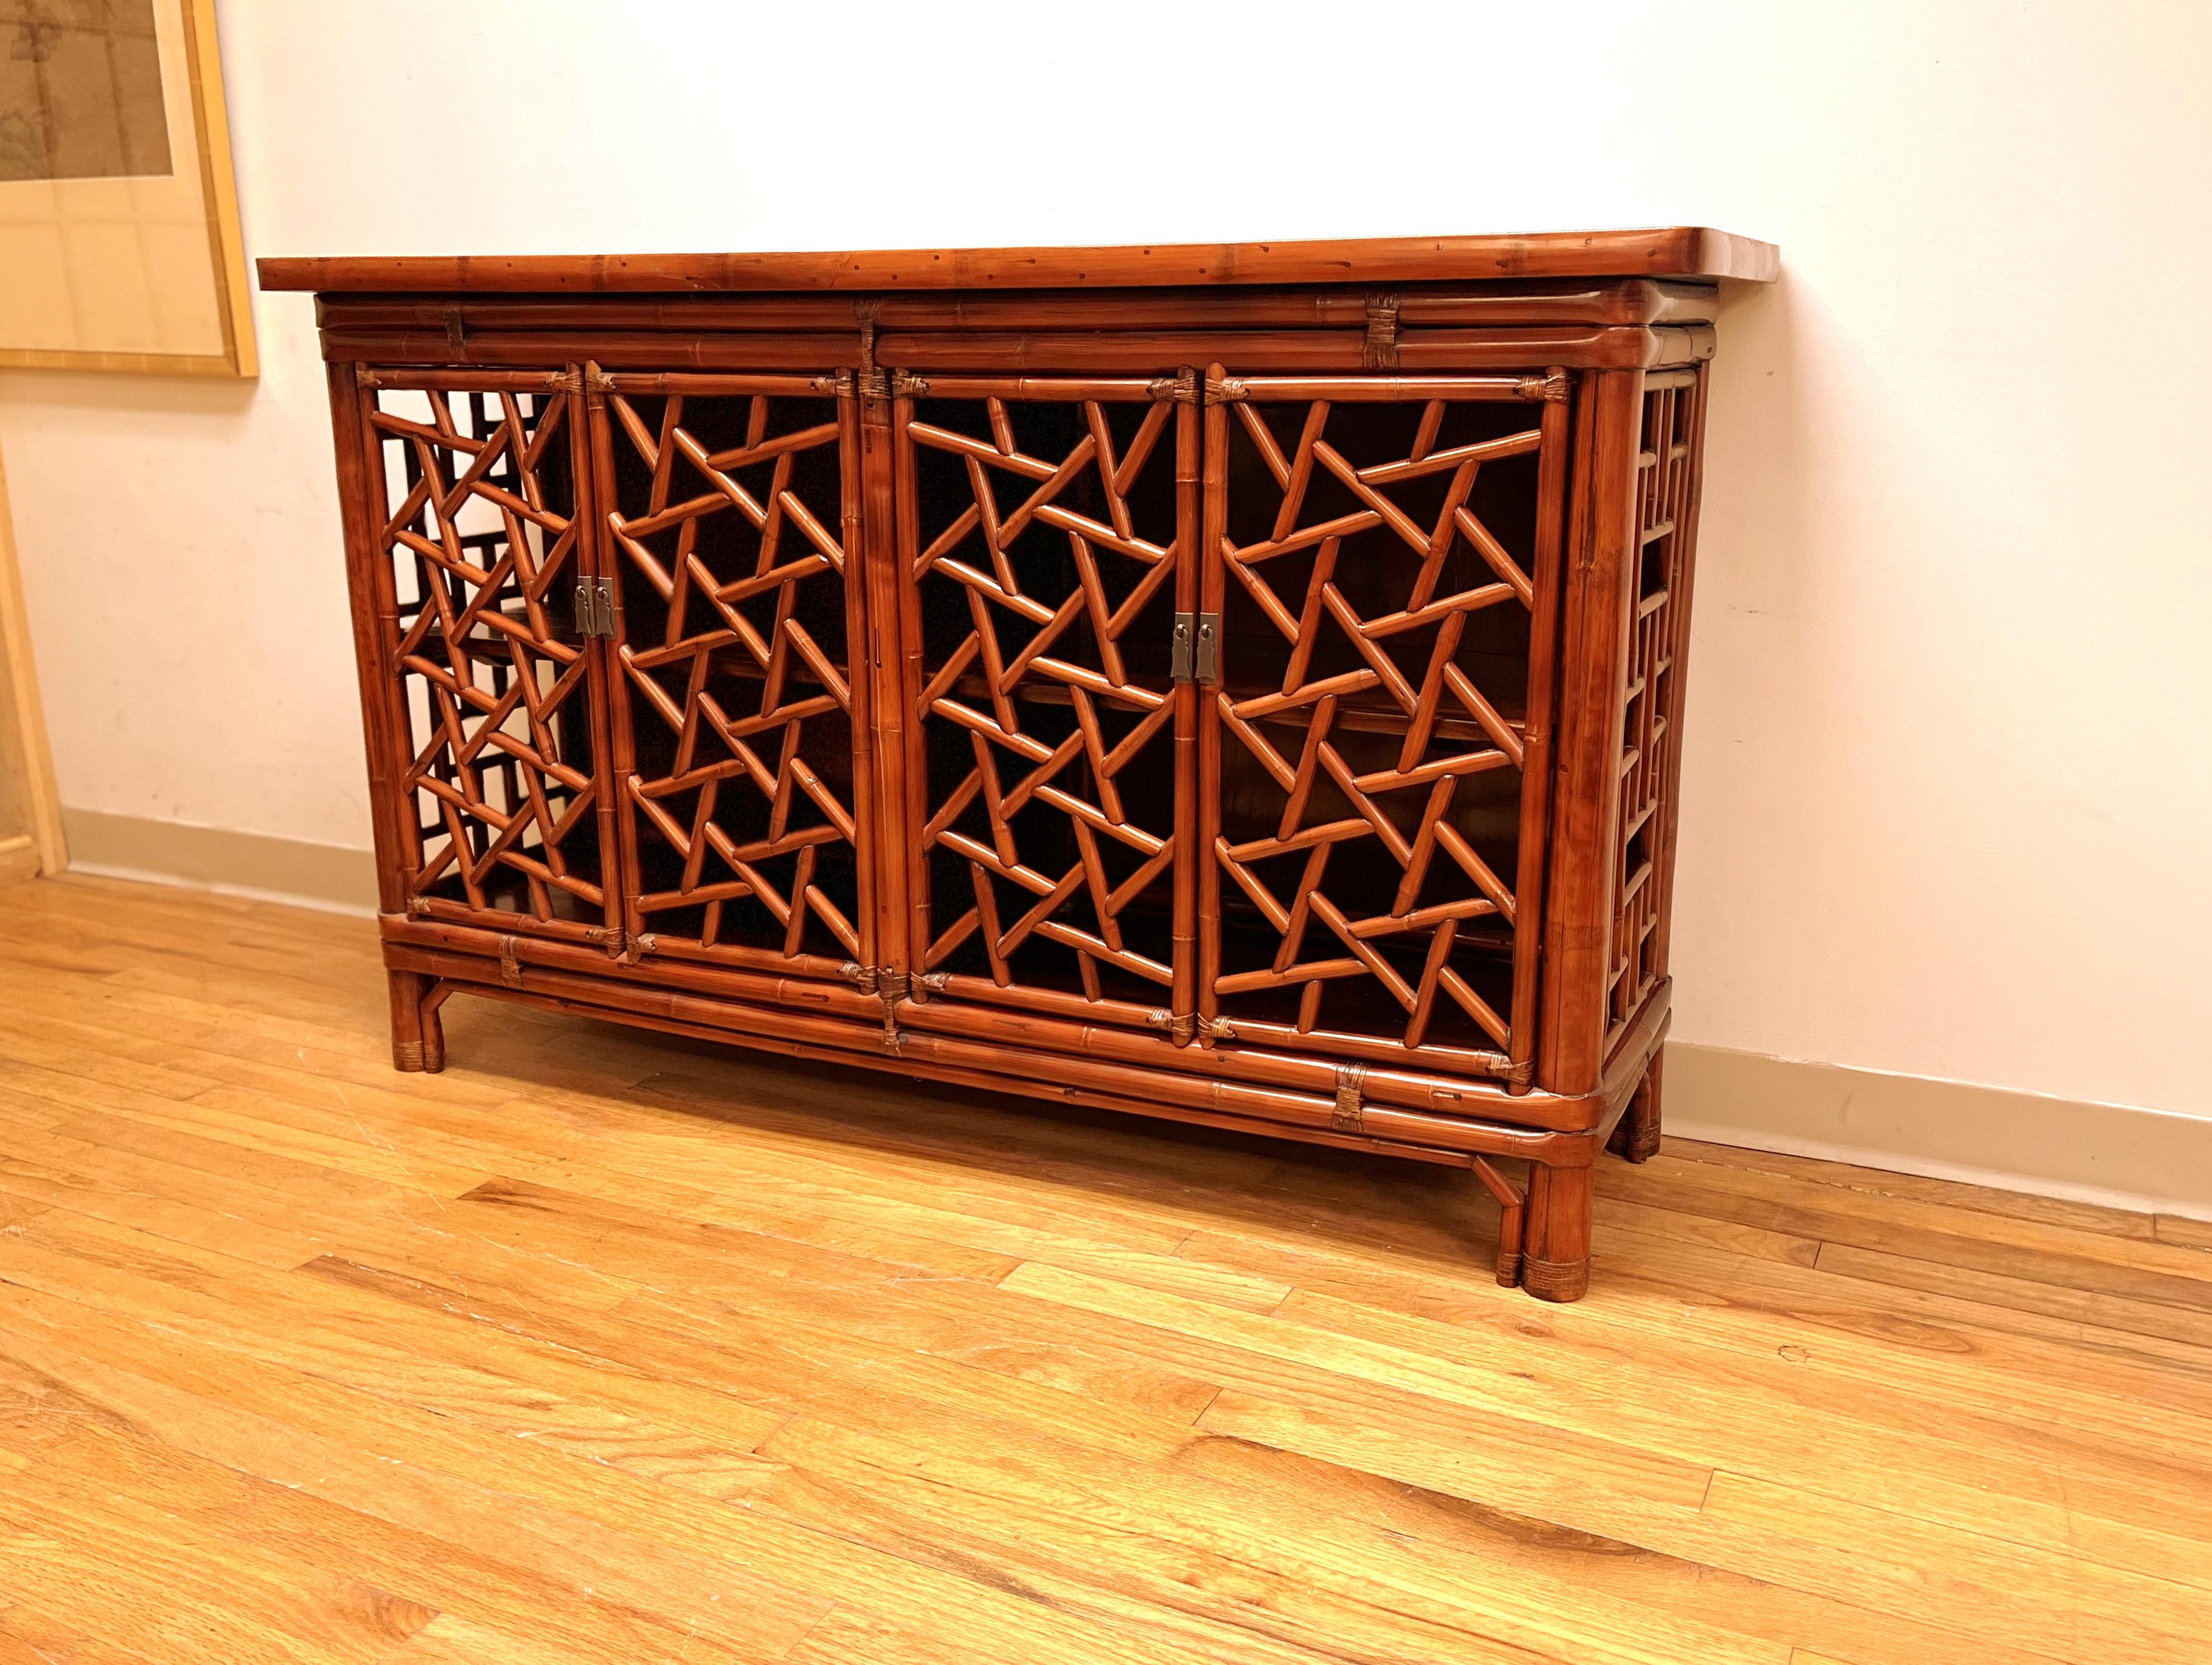 Bamboo Sideboard with Fret Work Motif In Excellent Condition For Sale In Greenwich, CT